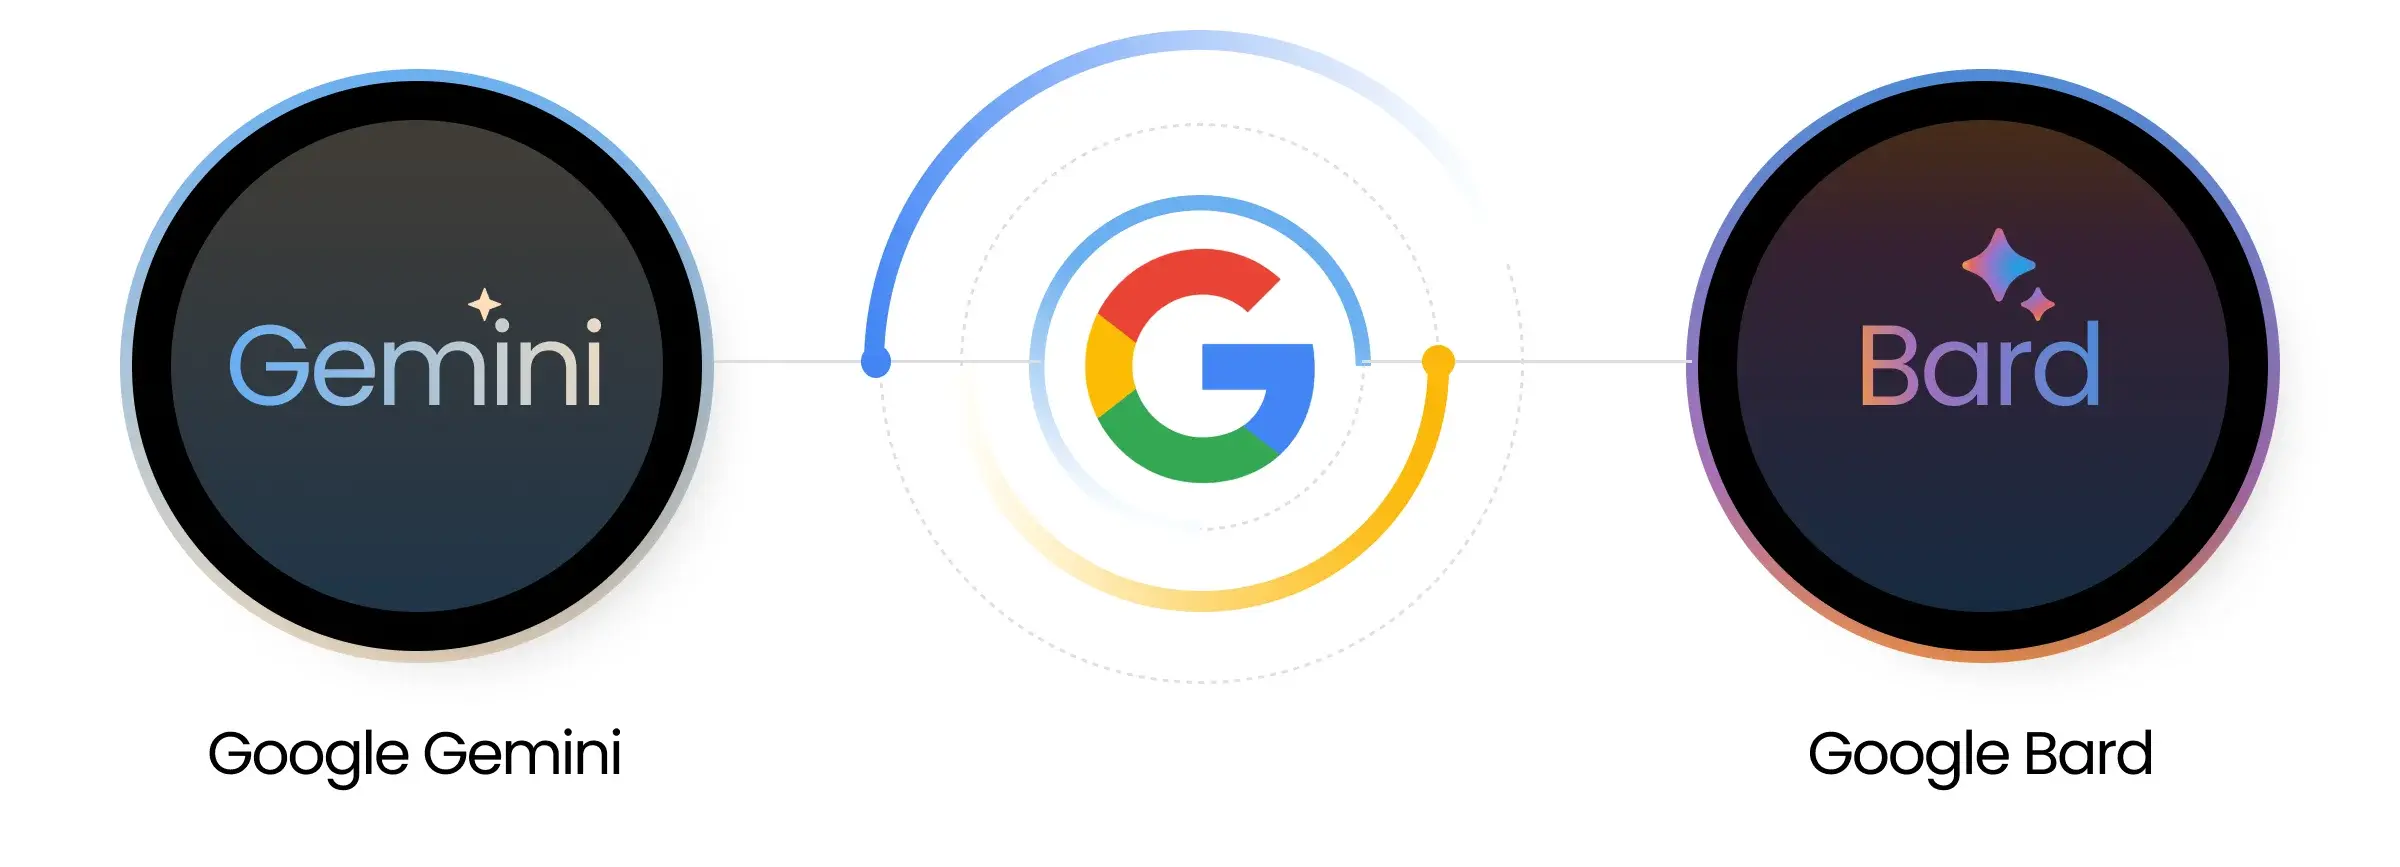 How is Google Gemini different from Google Bard_